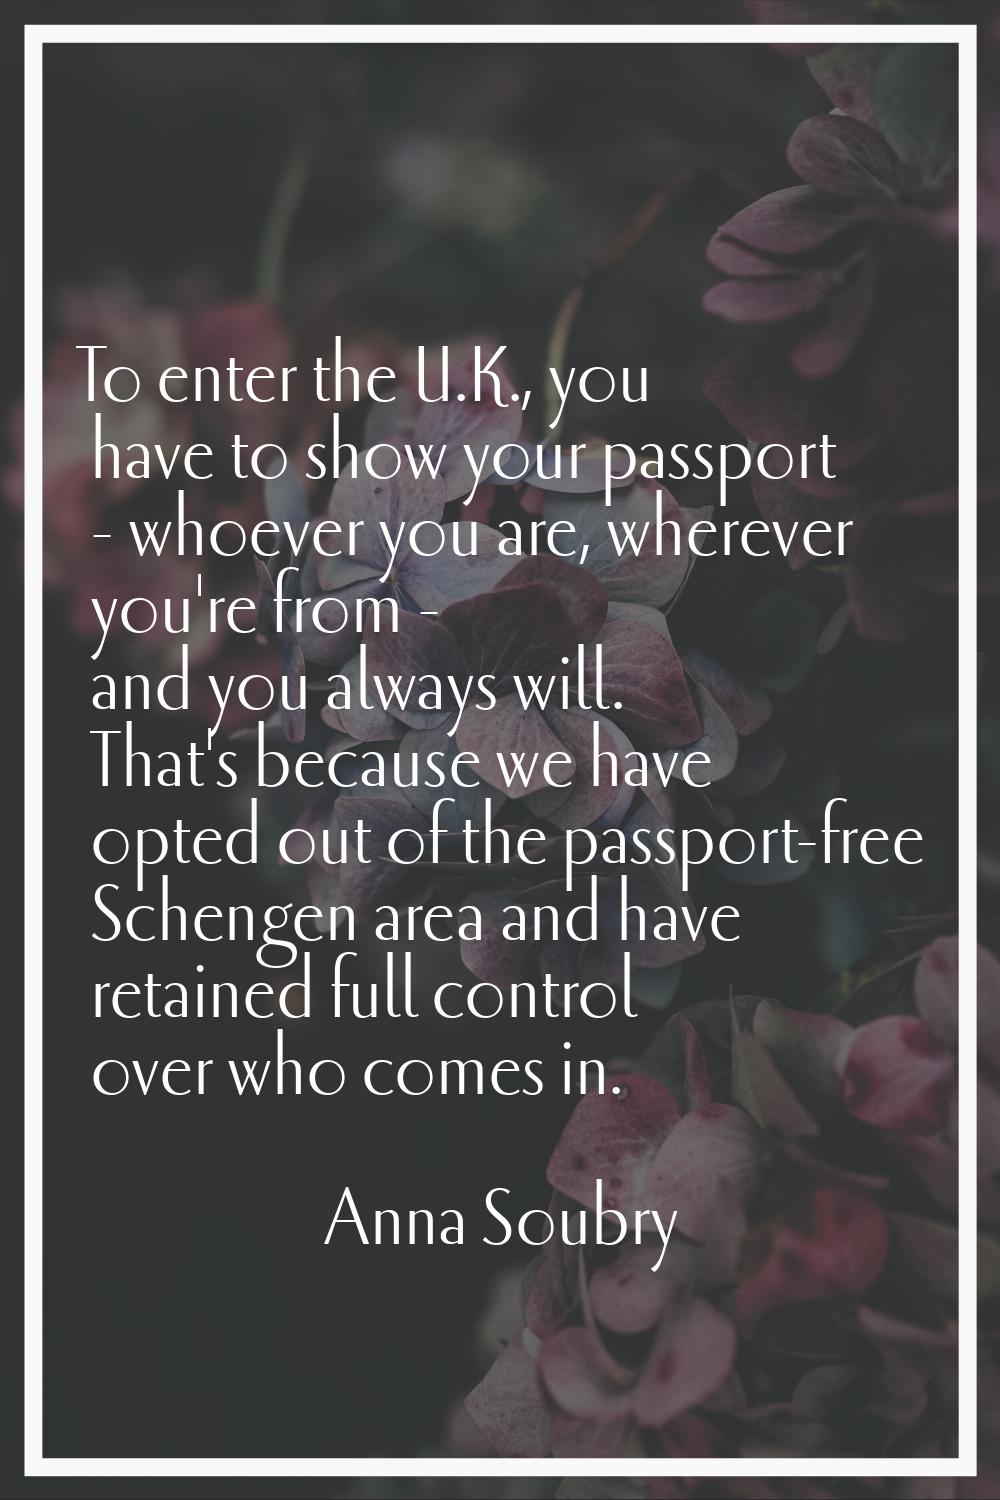 To enter the U.K., you have to show your passport - whoever you are, wherever you're from - and you